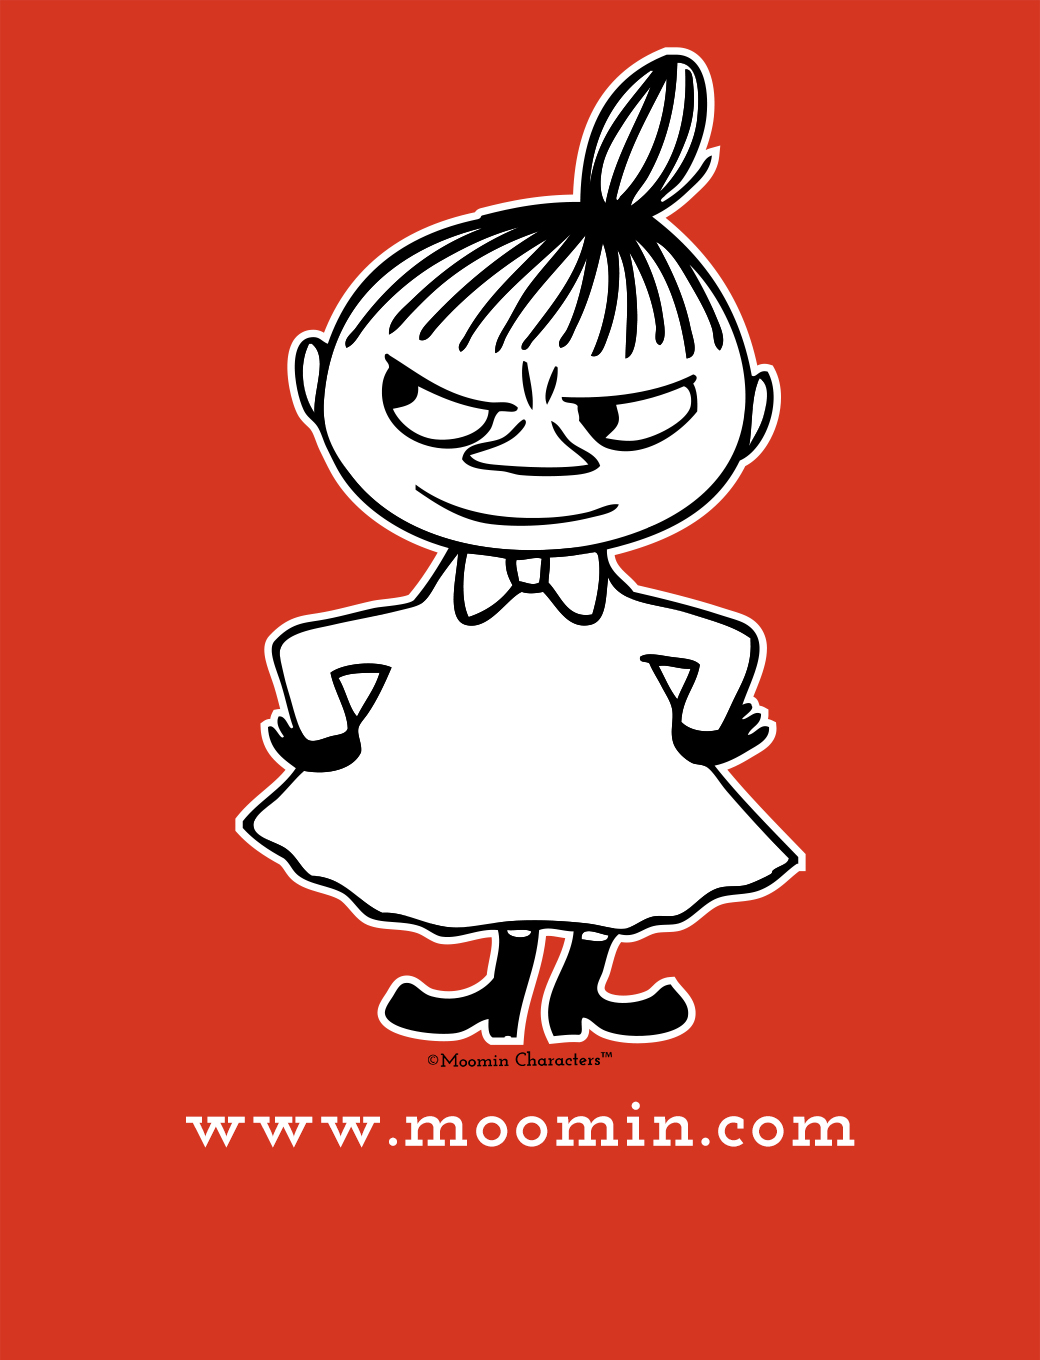 Moomin Wallpaper April Edition Featuring Little My Moomin